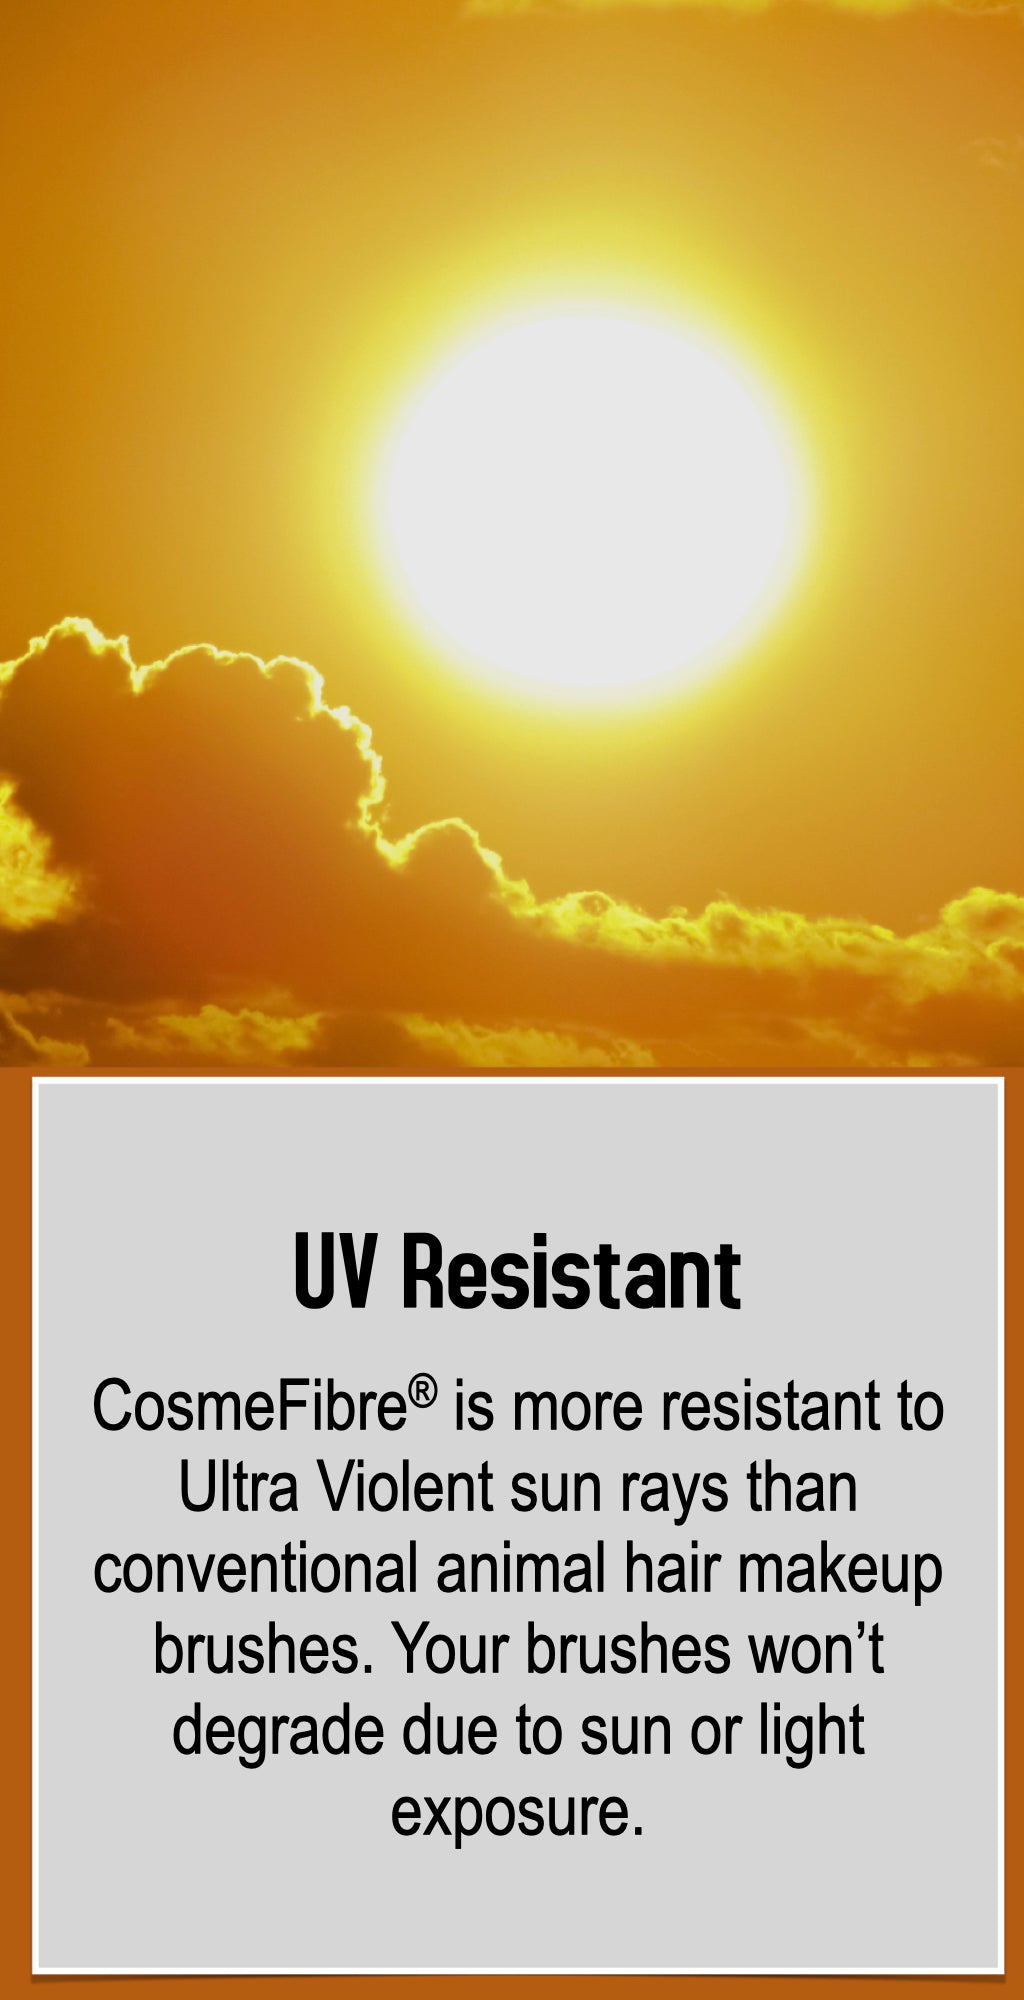 CosmeFibre® is more resistant to Ultra Violet sun rays than conventional animal hair makeup brushes. Your brushes won’t degrade due to sun or light exposure.